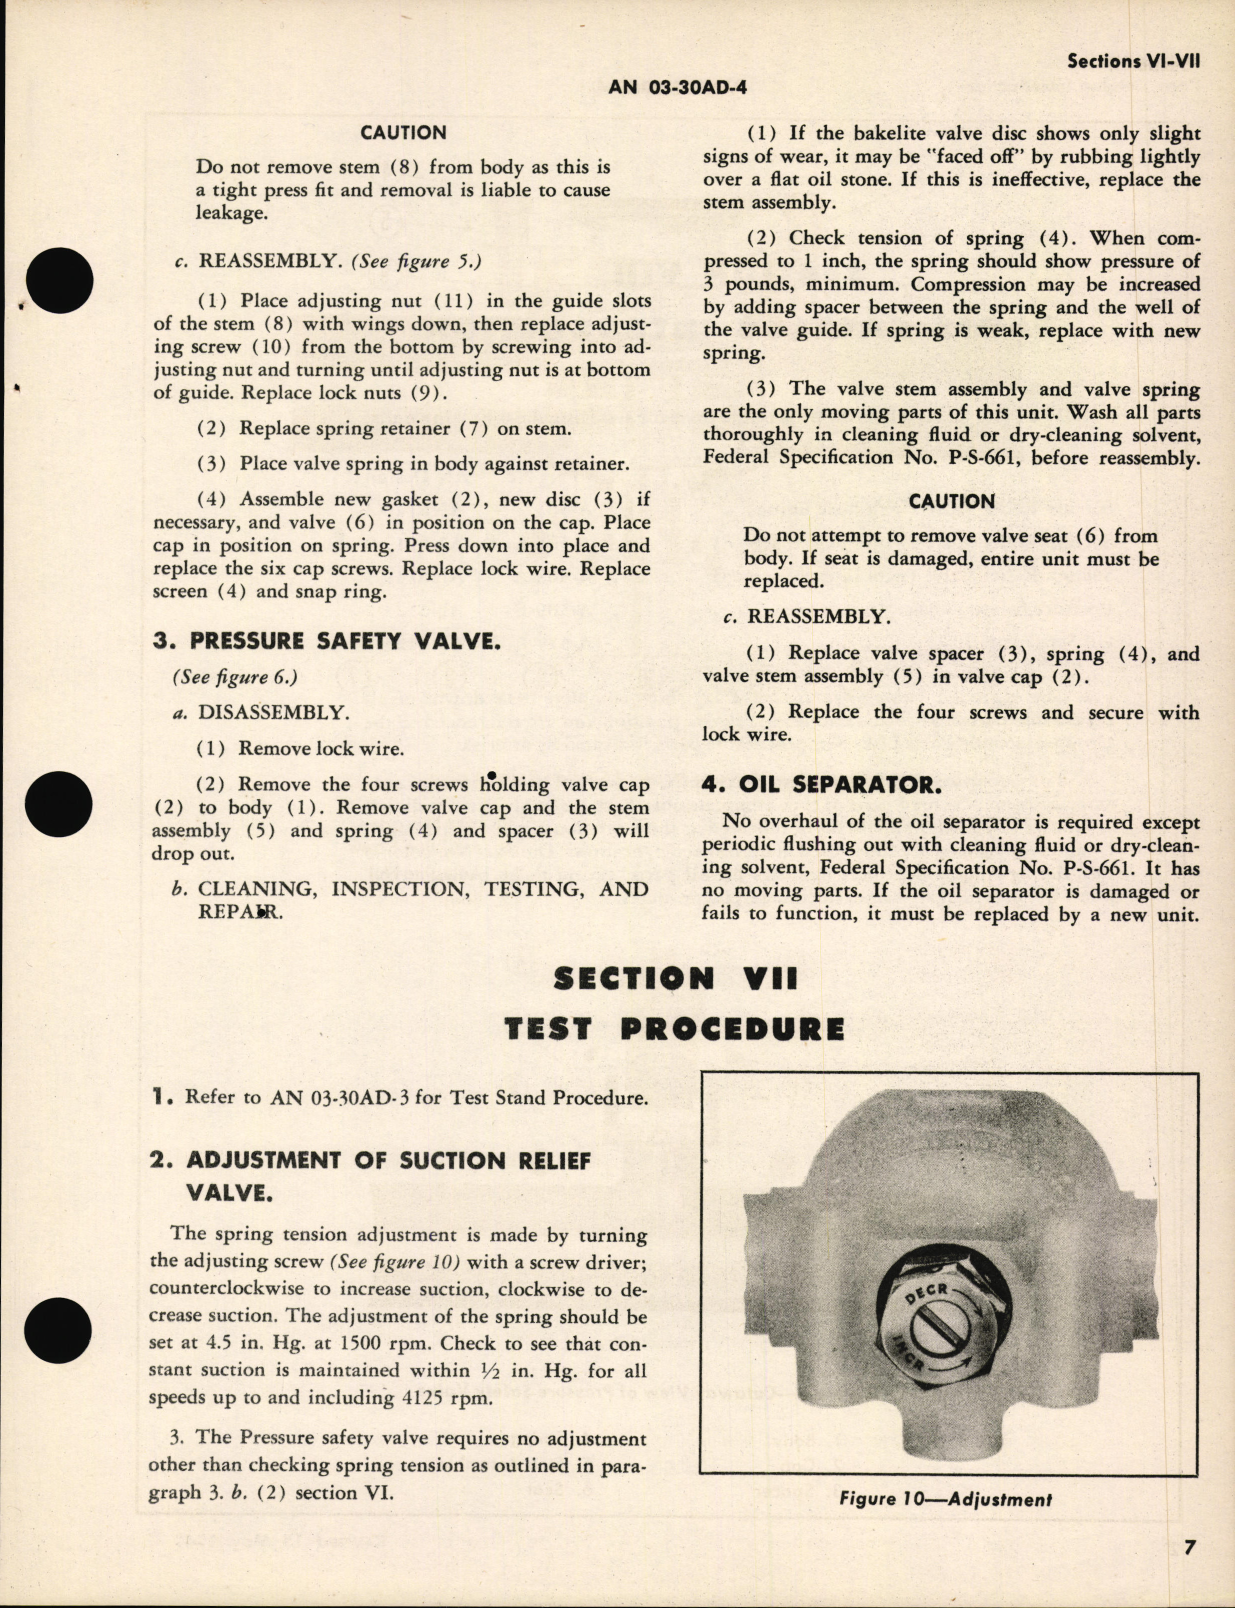 Sample page 7 from AirCorps Library document: Handbook Operation, Service, and Overhaul Instructions with Parts Catalog for Relief Valves, Safety Valve and Oil Separator 